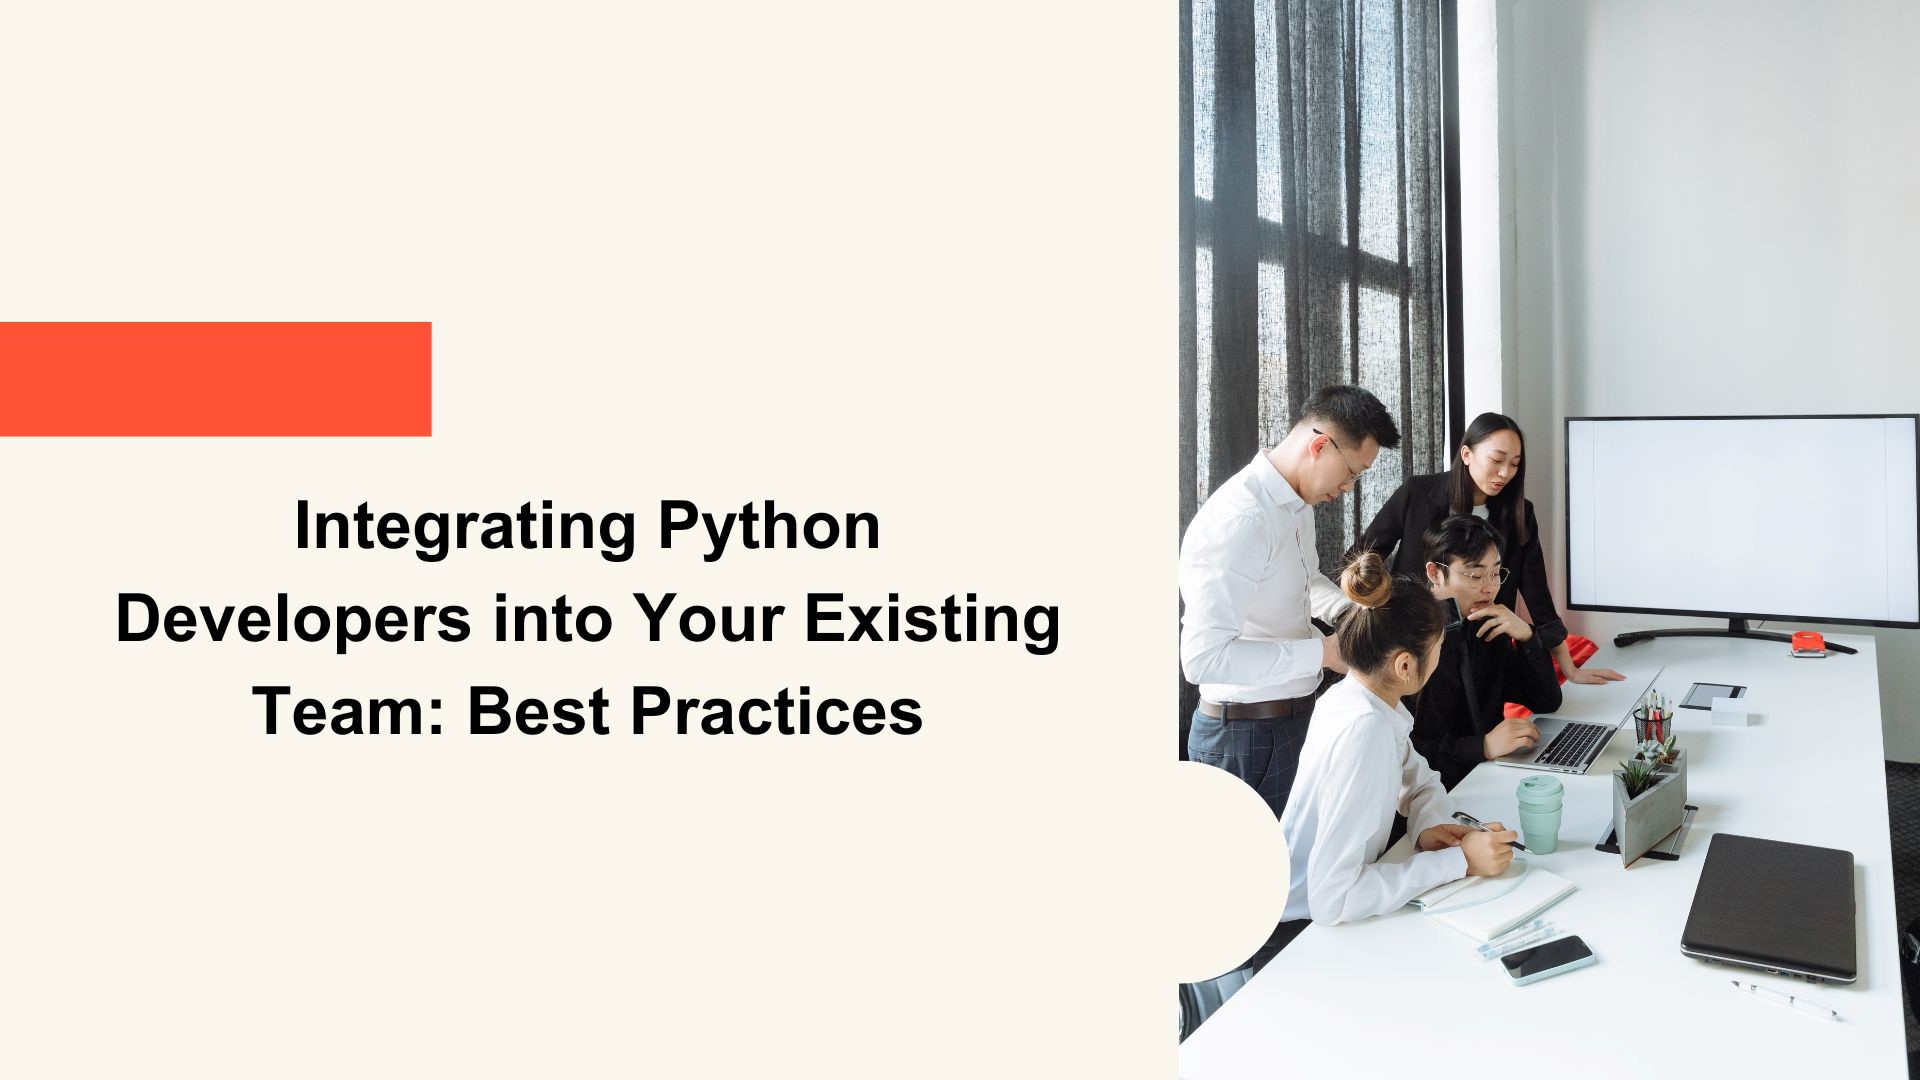 Integrating Python Developers into Your Existing Team